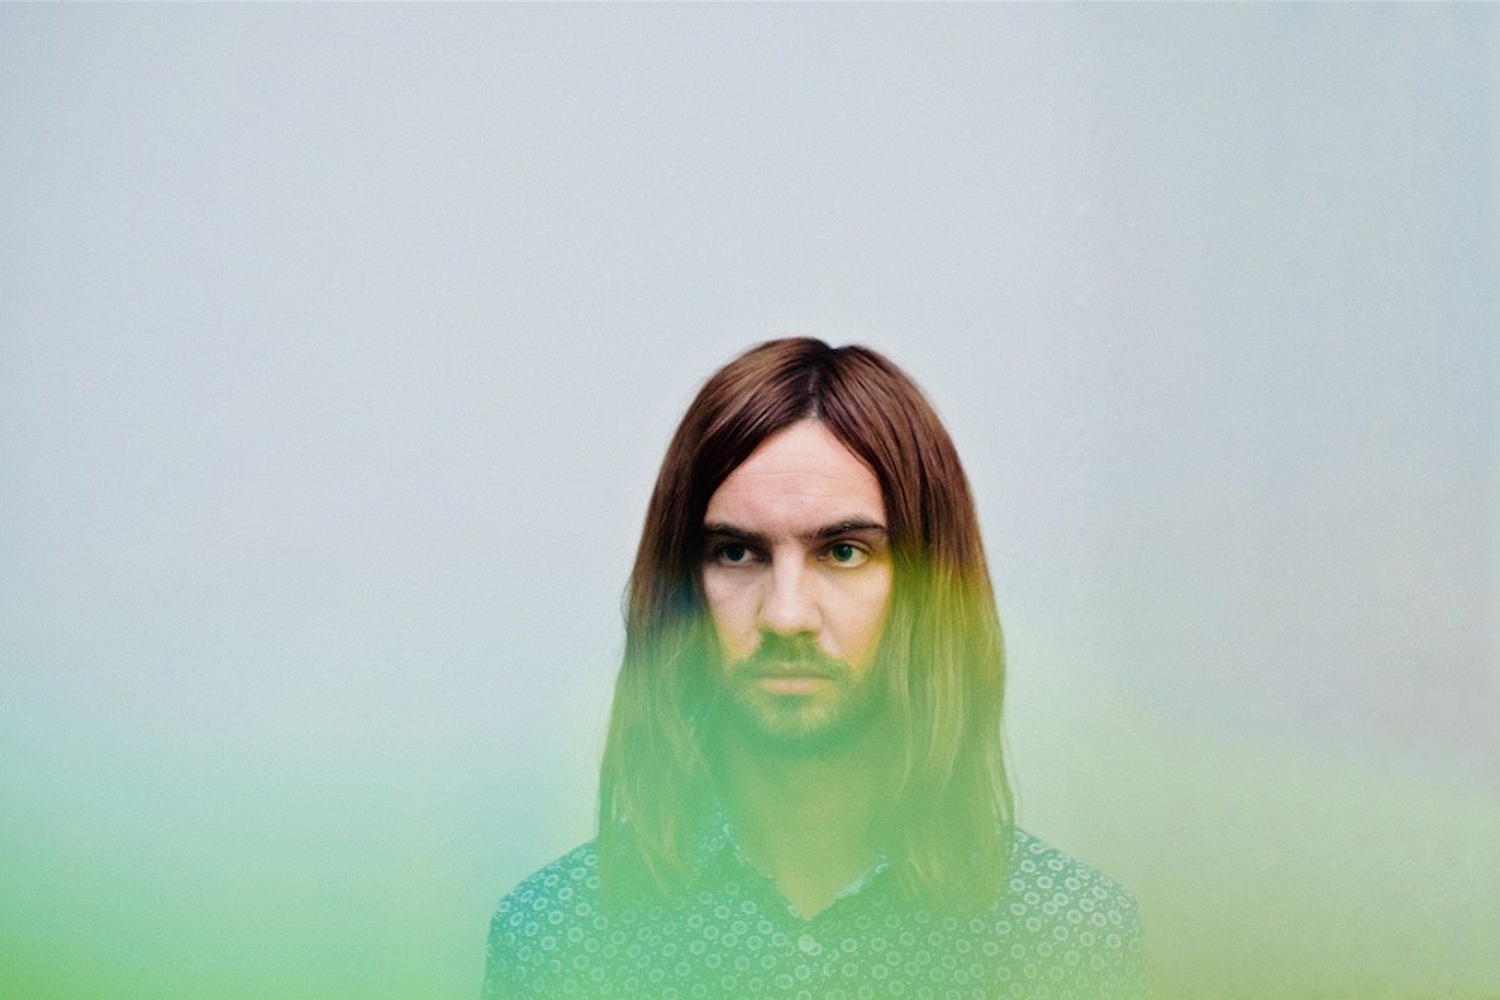 Win a pair of tickets to see Tame Impala, Interpol & more at Lowlands Festival 2015